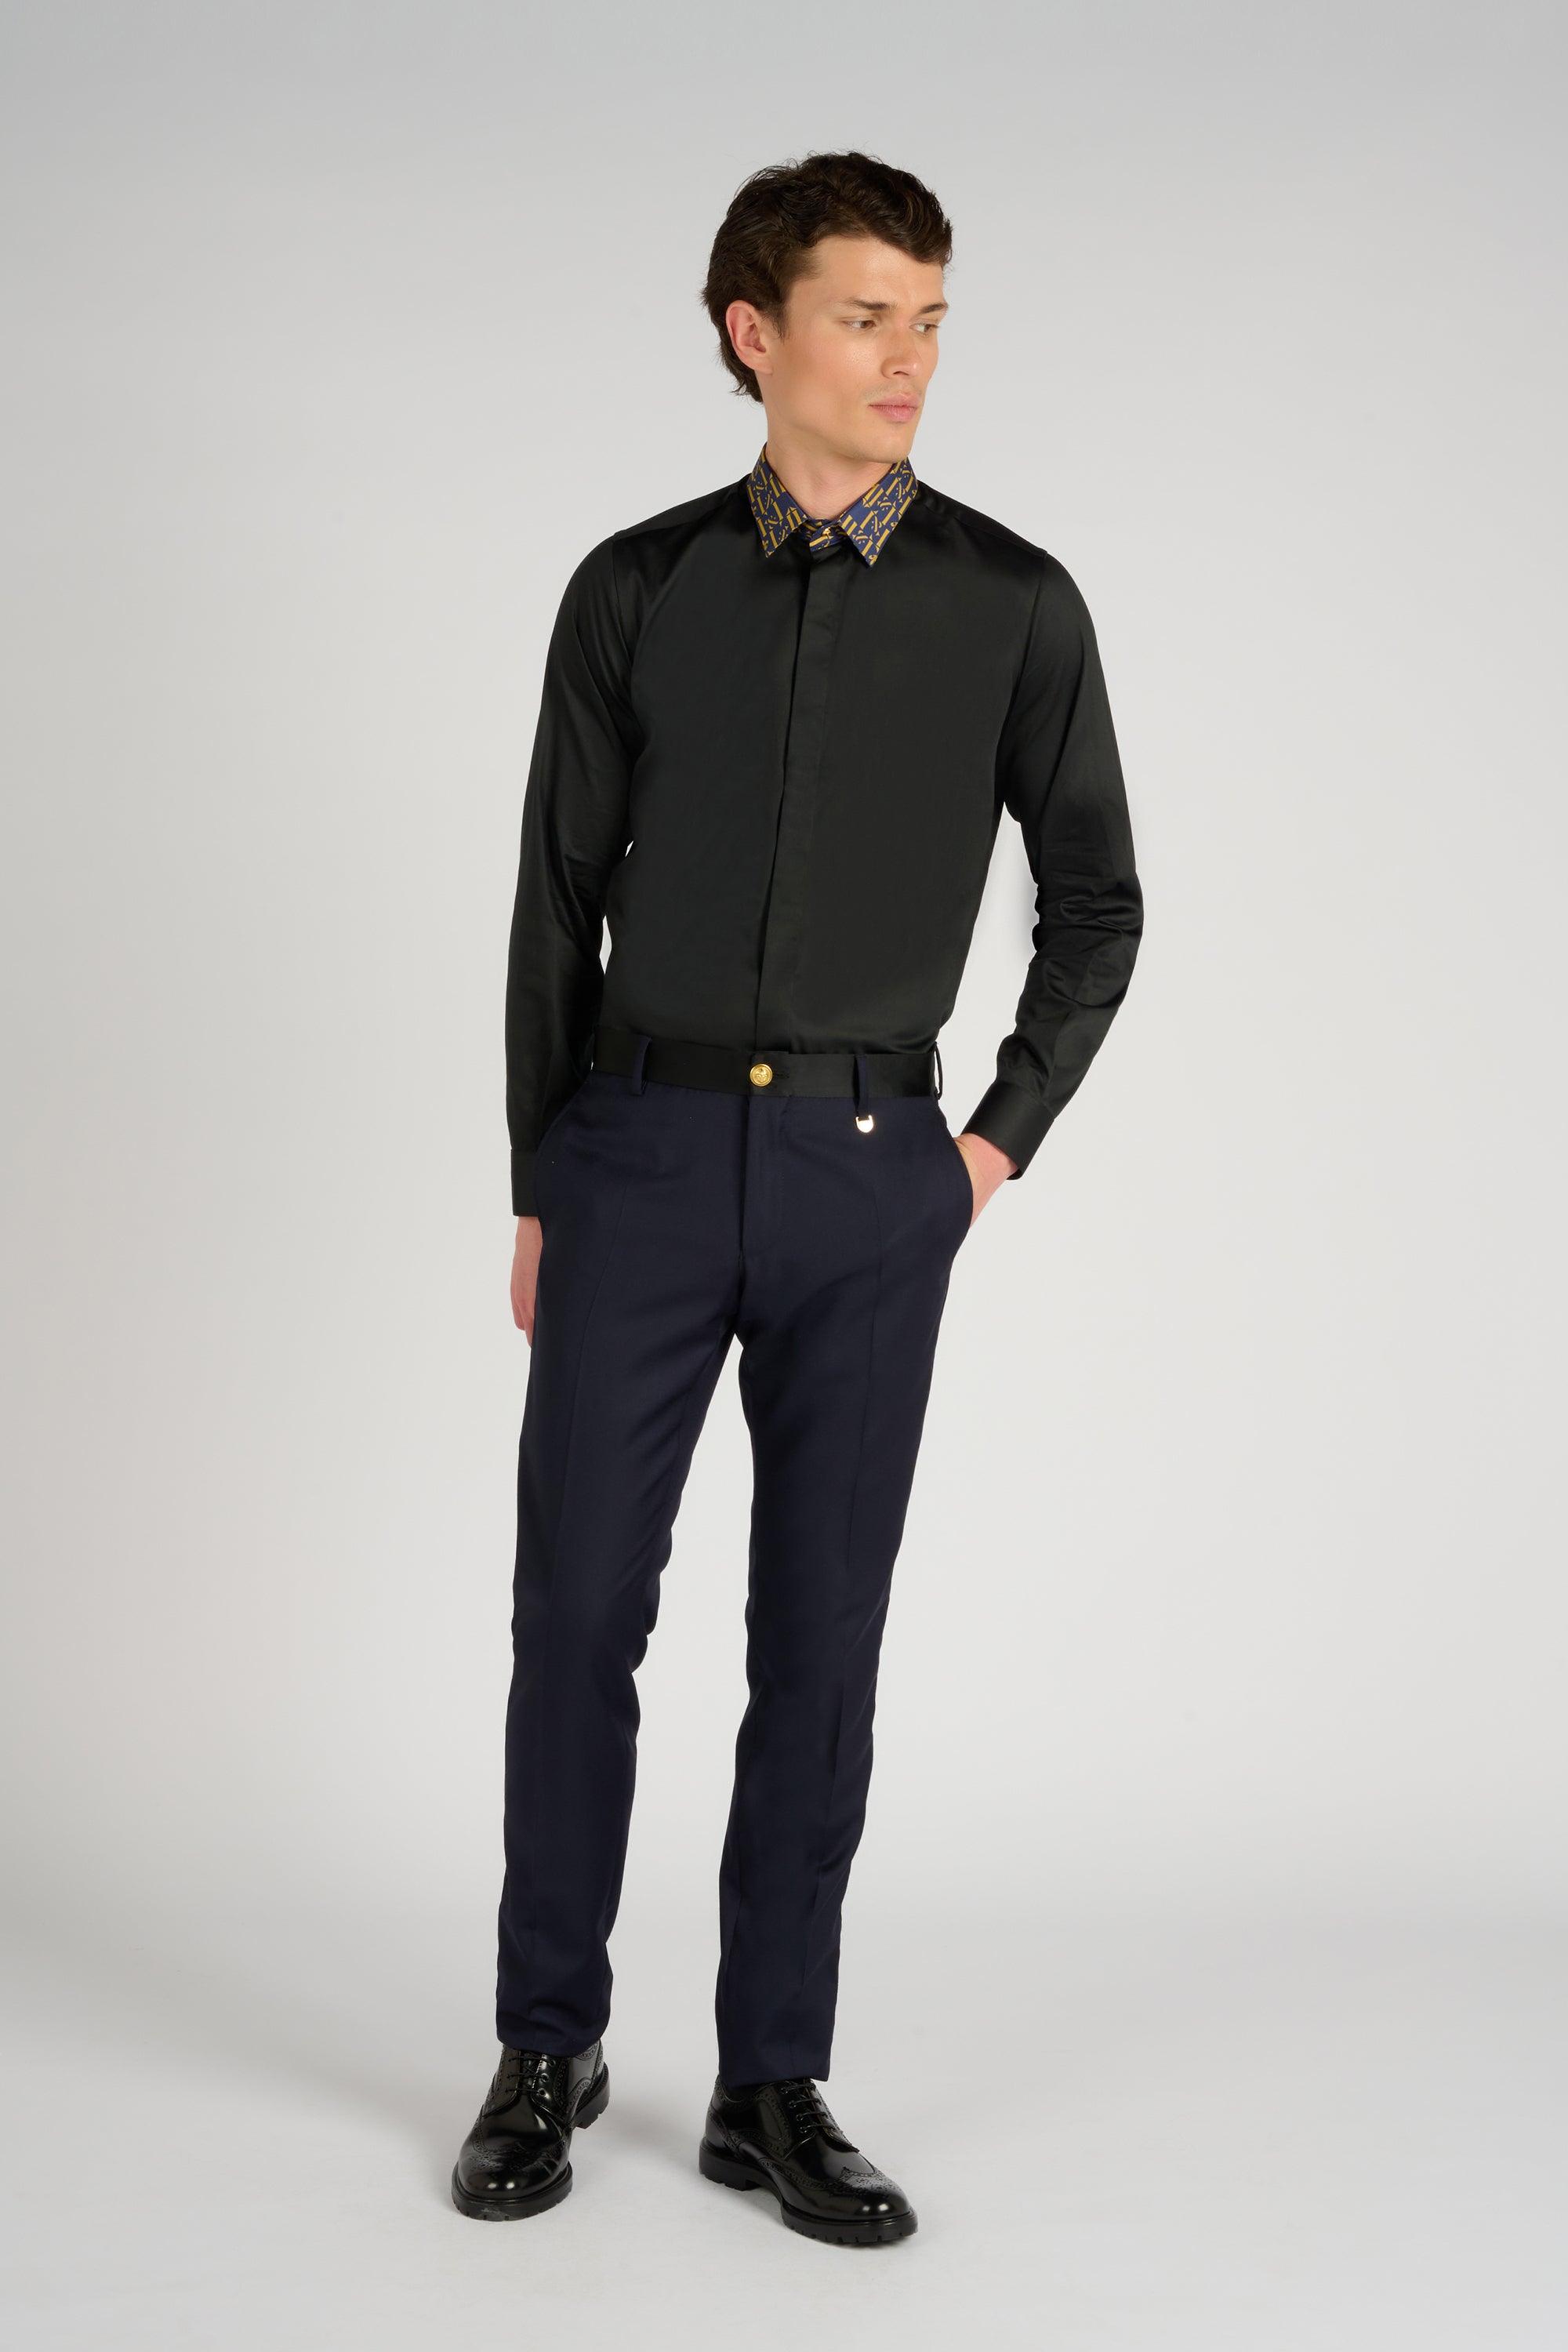 CHEMISE NOIRE COL NAVY - Lords & Fools 